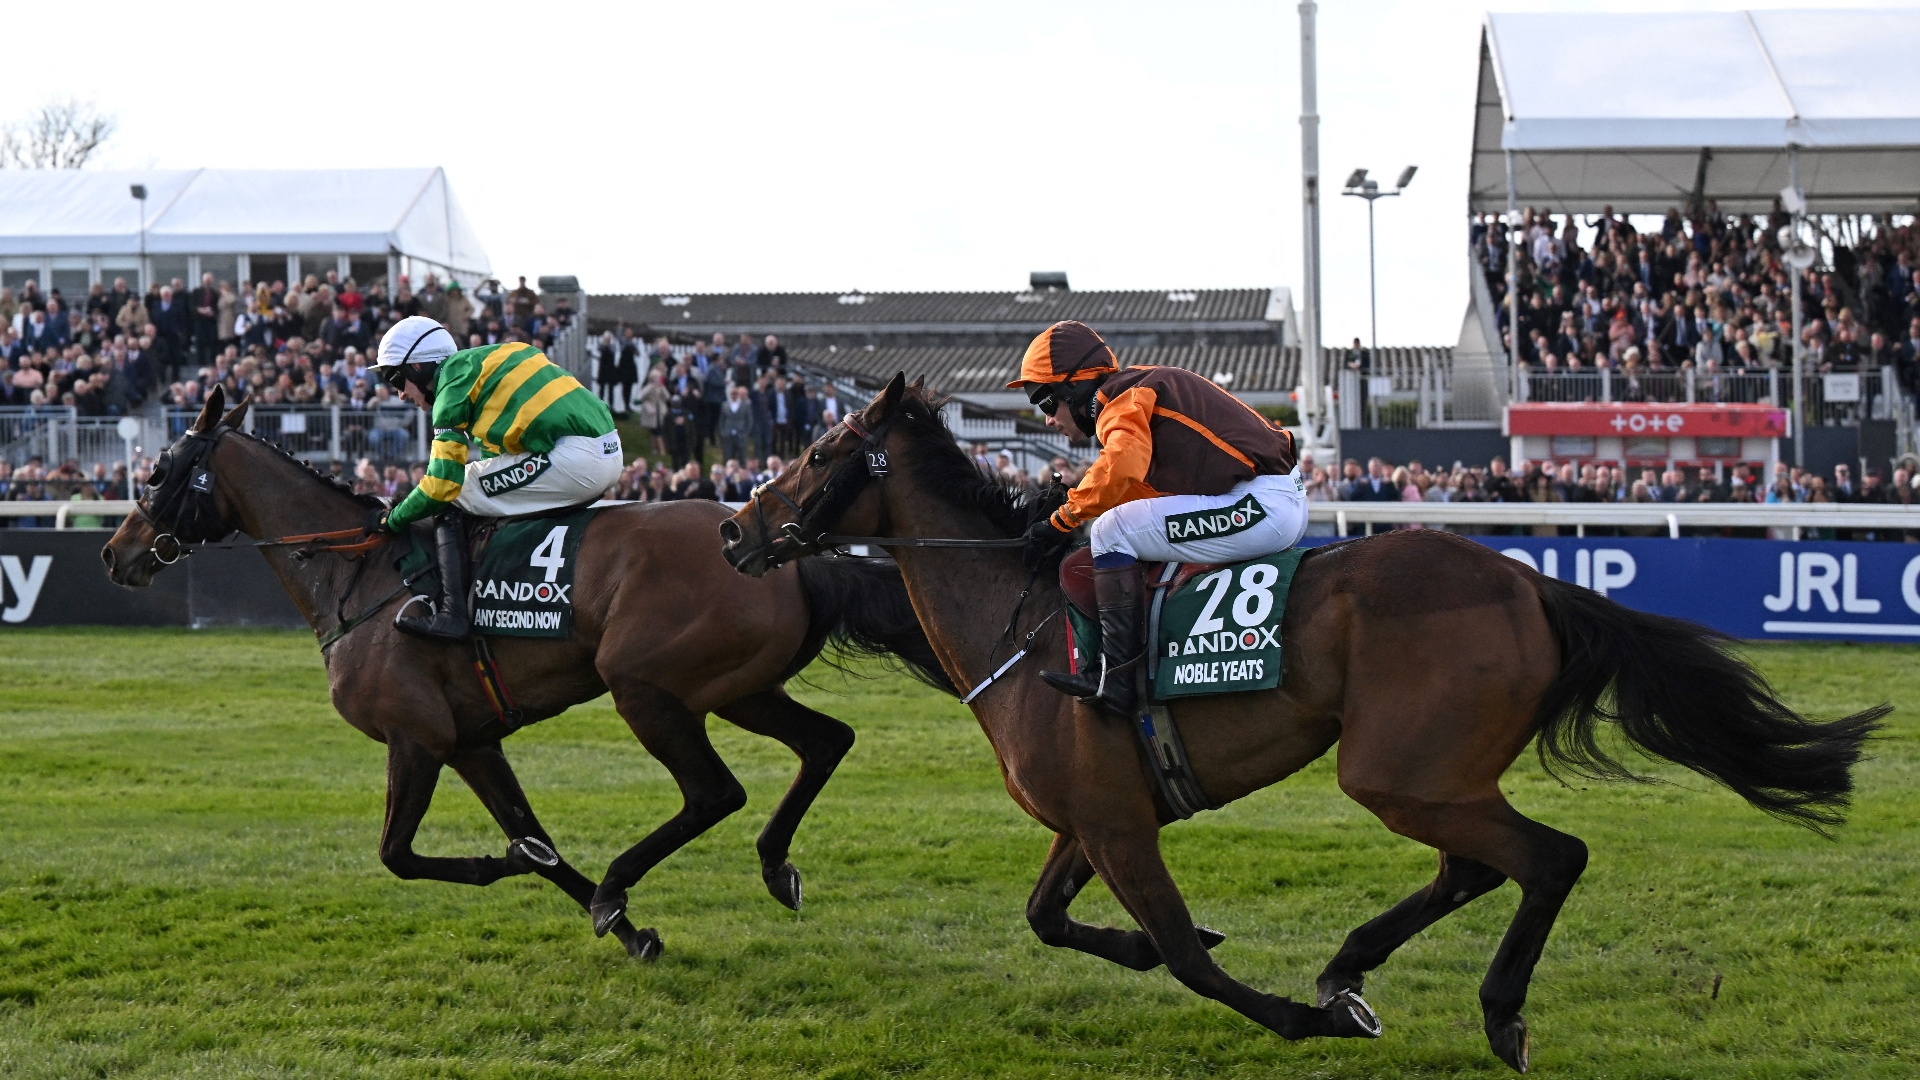 2023 Grand National Weights Ratings and Runners for Aintree